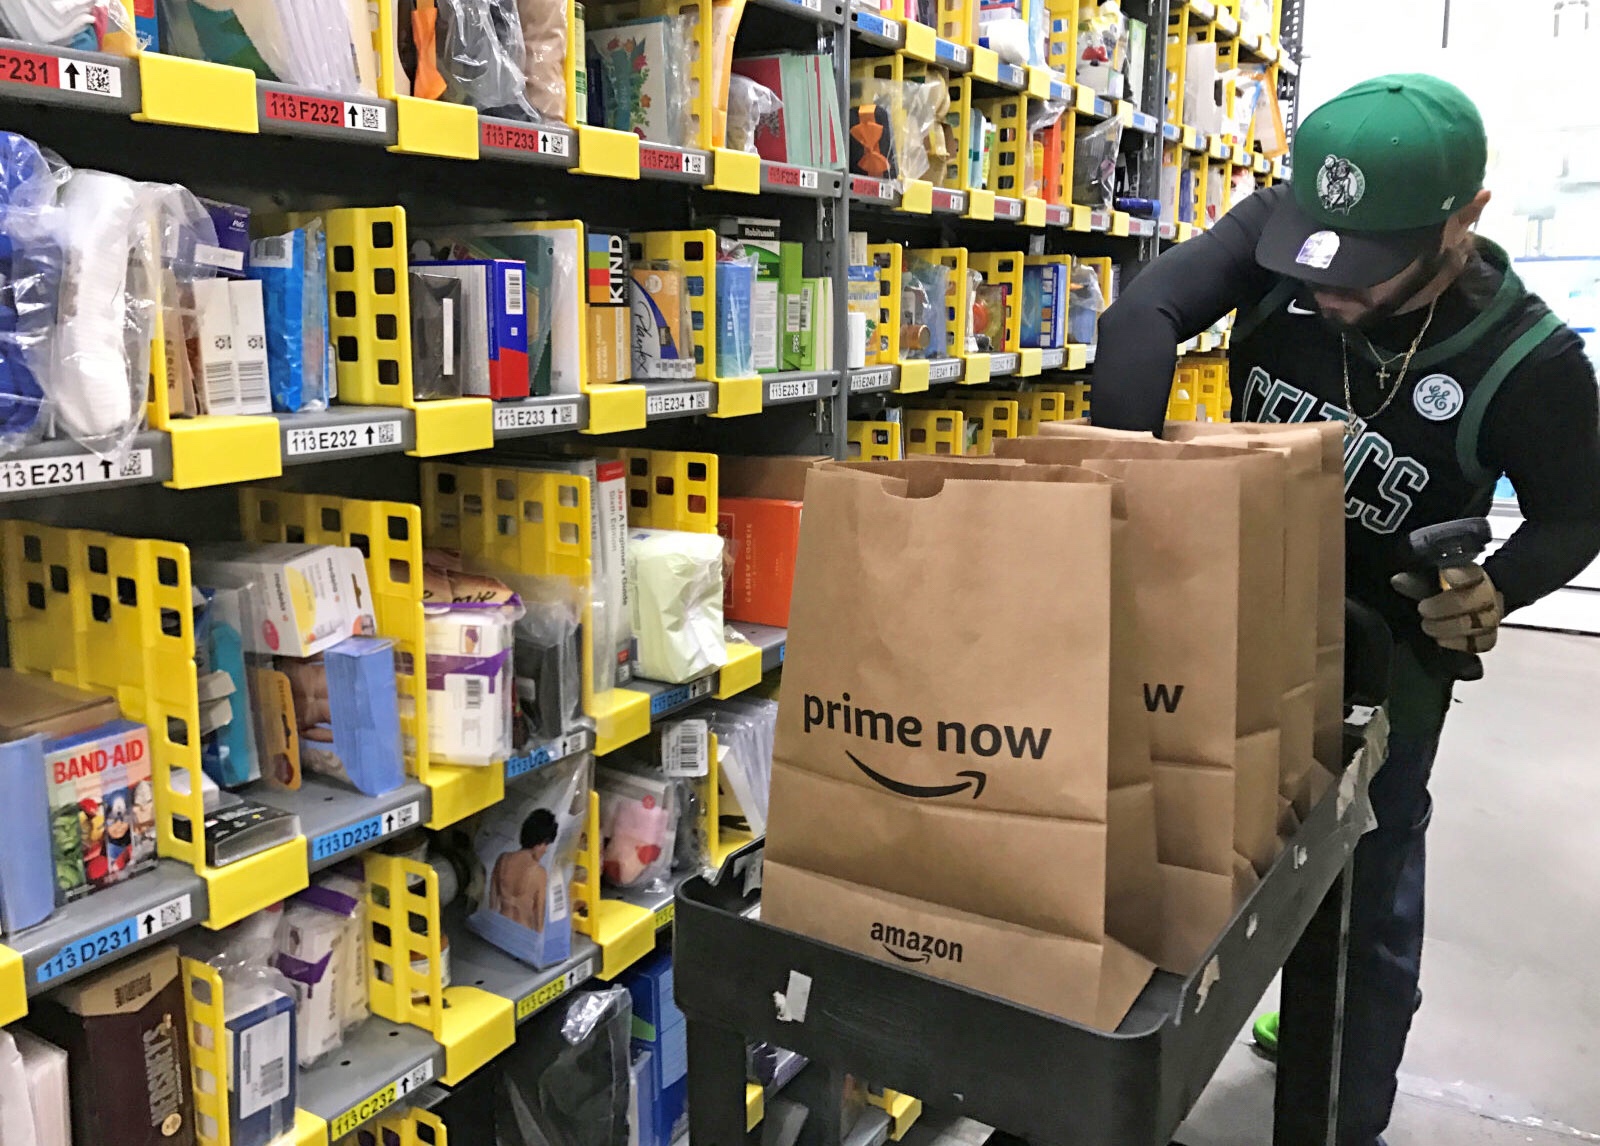 Amazon announces that it shipped over 5 billion items with Prime in 2017